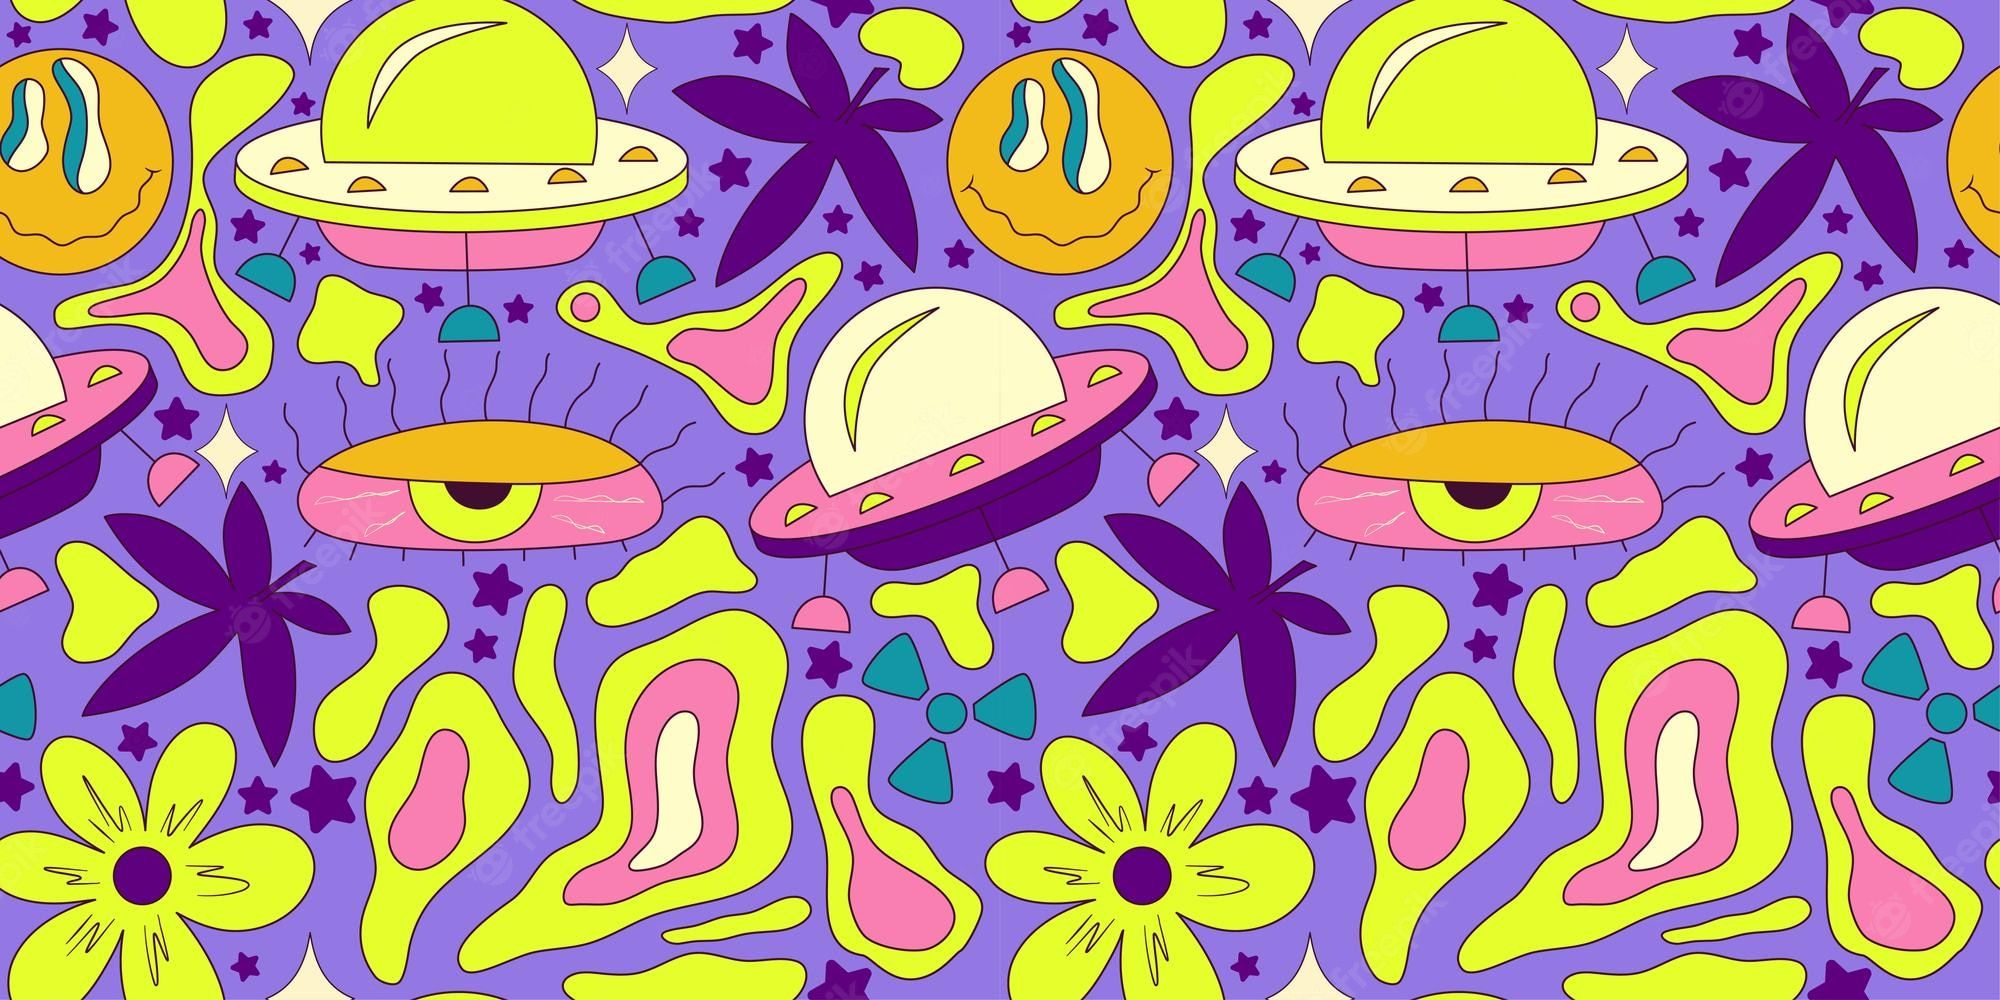 Premium Vector. Trippy smile seamless pattern with ufo and cannabis psychedelic hippy groovy print good 60s 70s mood vector trippy crazy illustration smile face seamless pattern y2k style